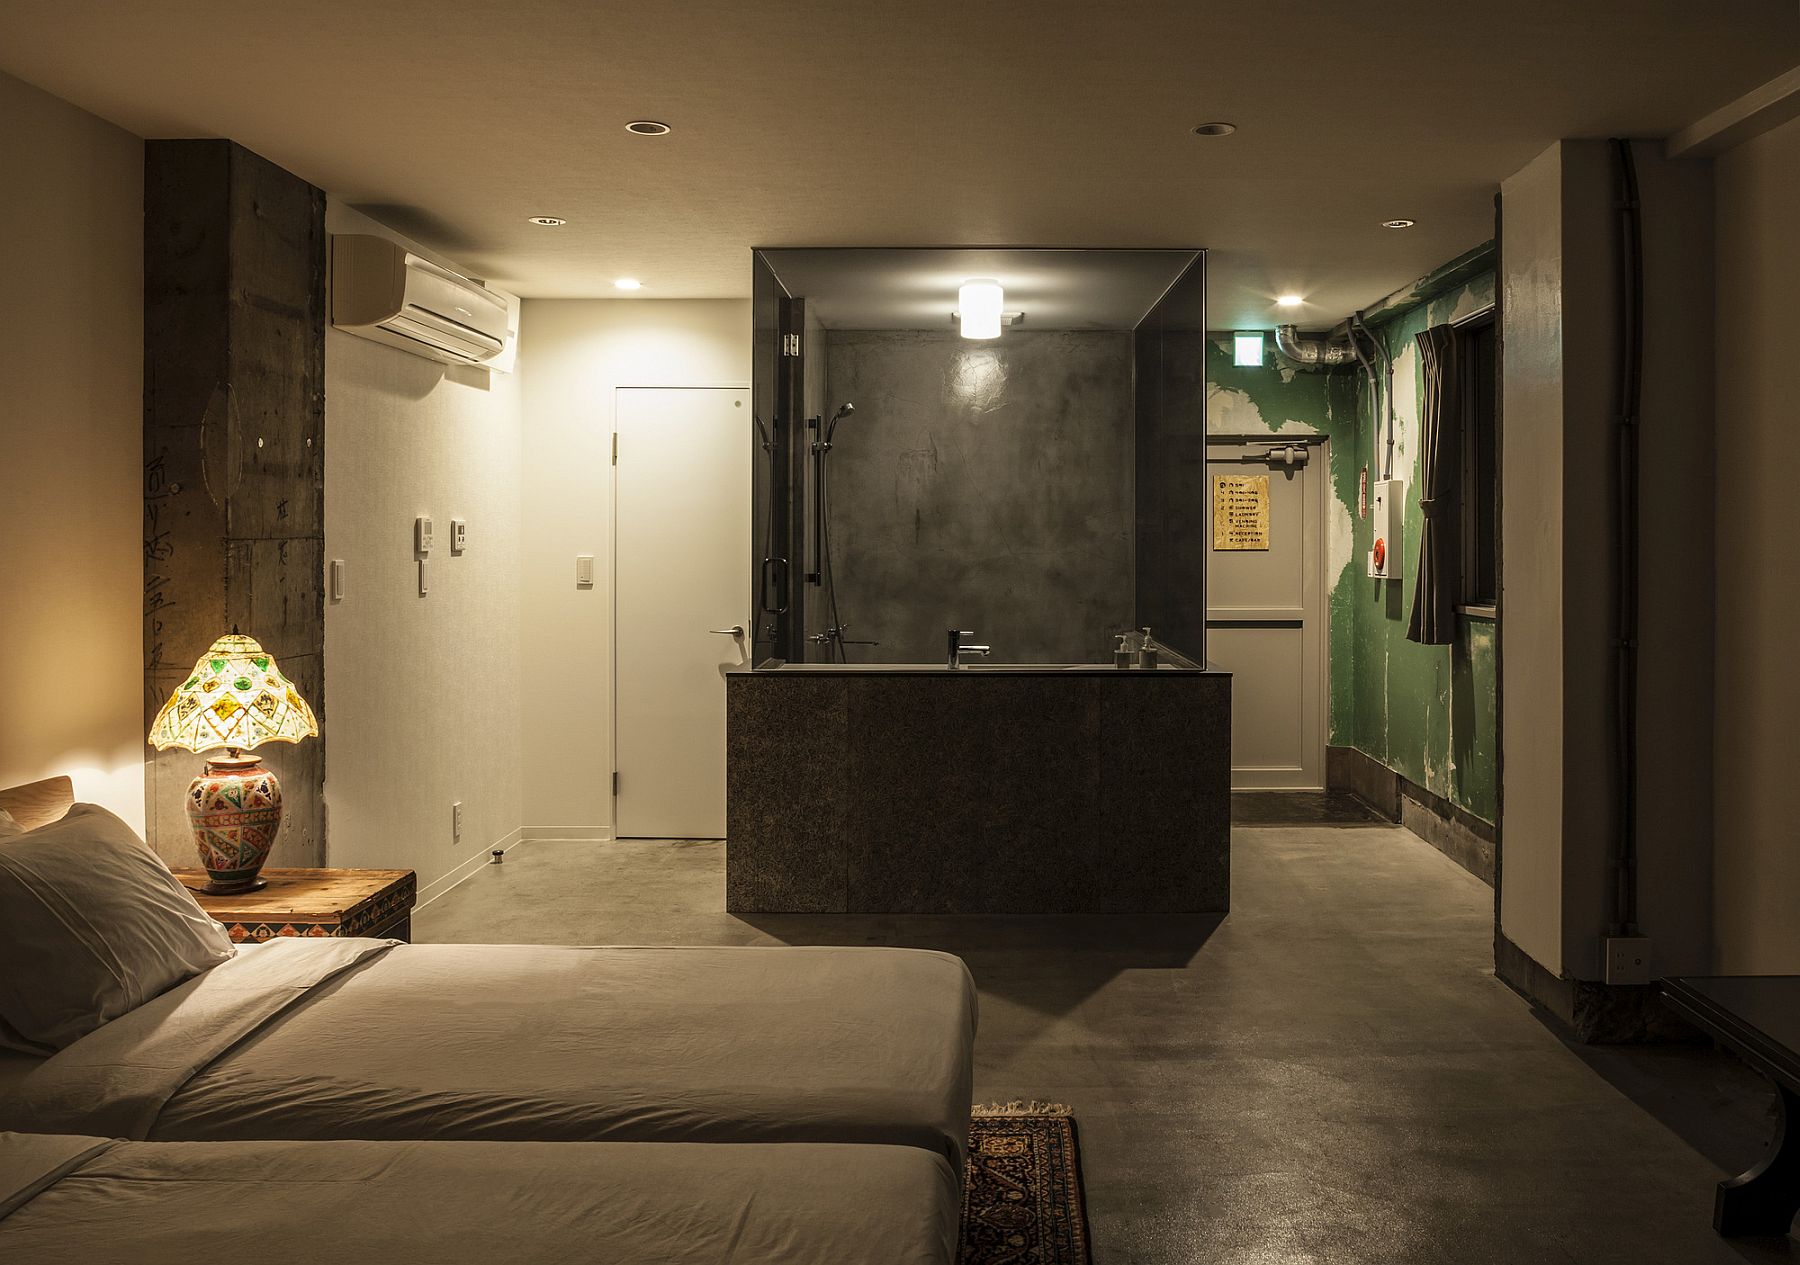 Design of the hotel room with bath space